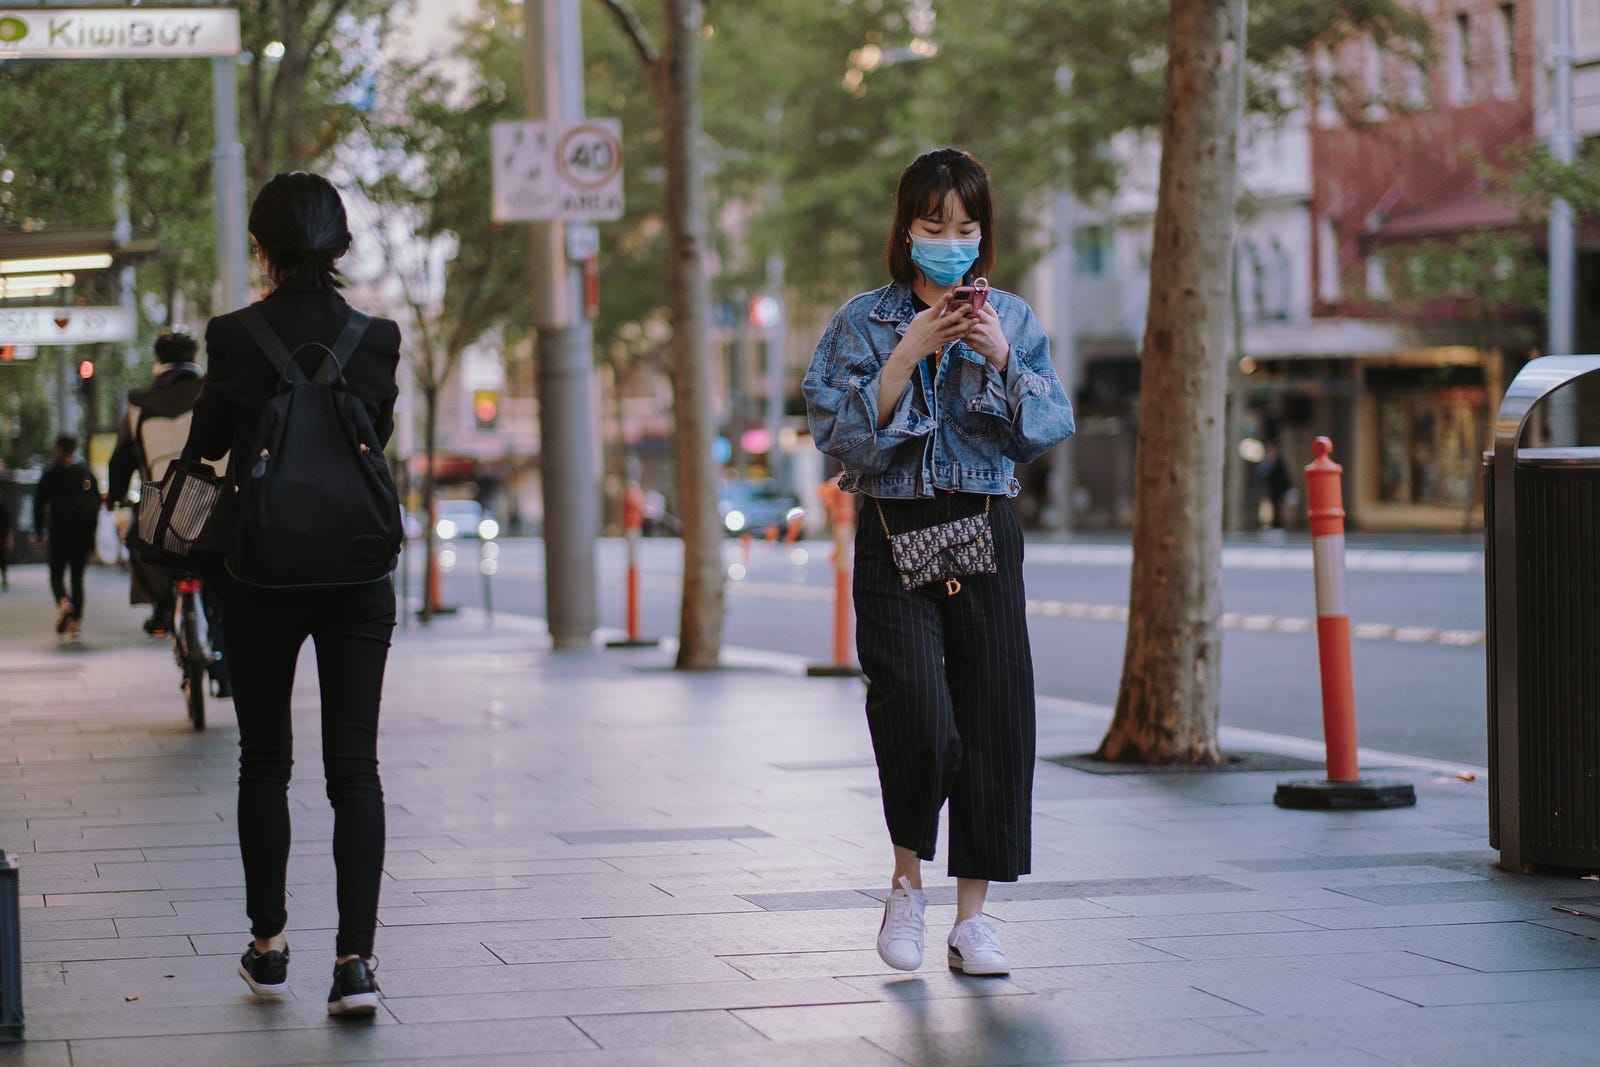 A few Asian individuals walk on a sidewalk. One wears a face mask as she manipulates her smartphone. A new study shows that a COVID infection provides considerable protection against future severe infection.